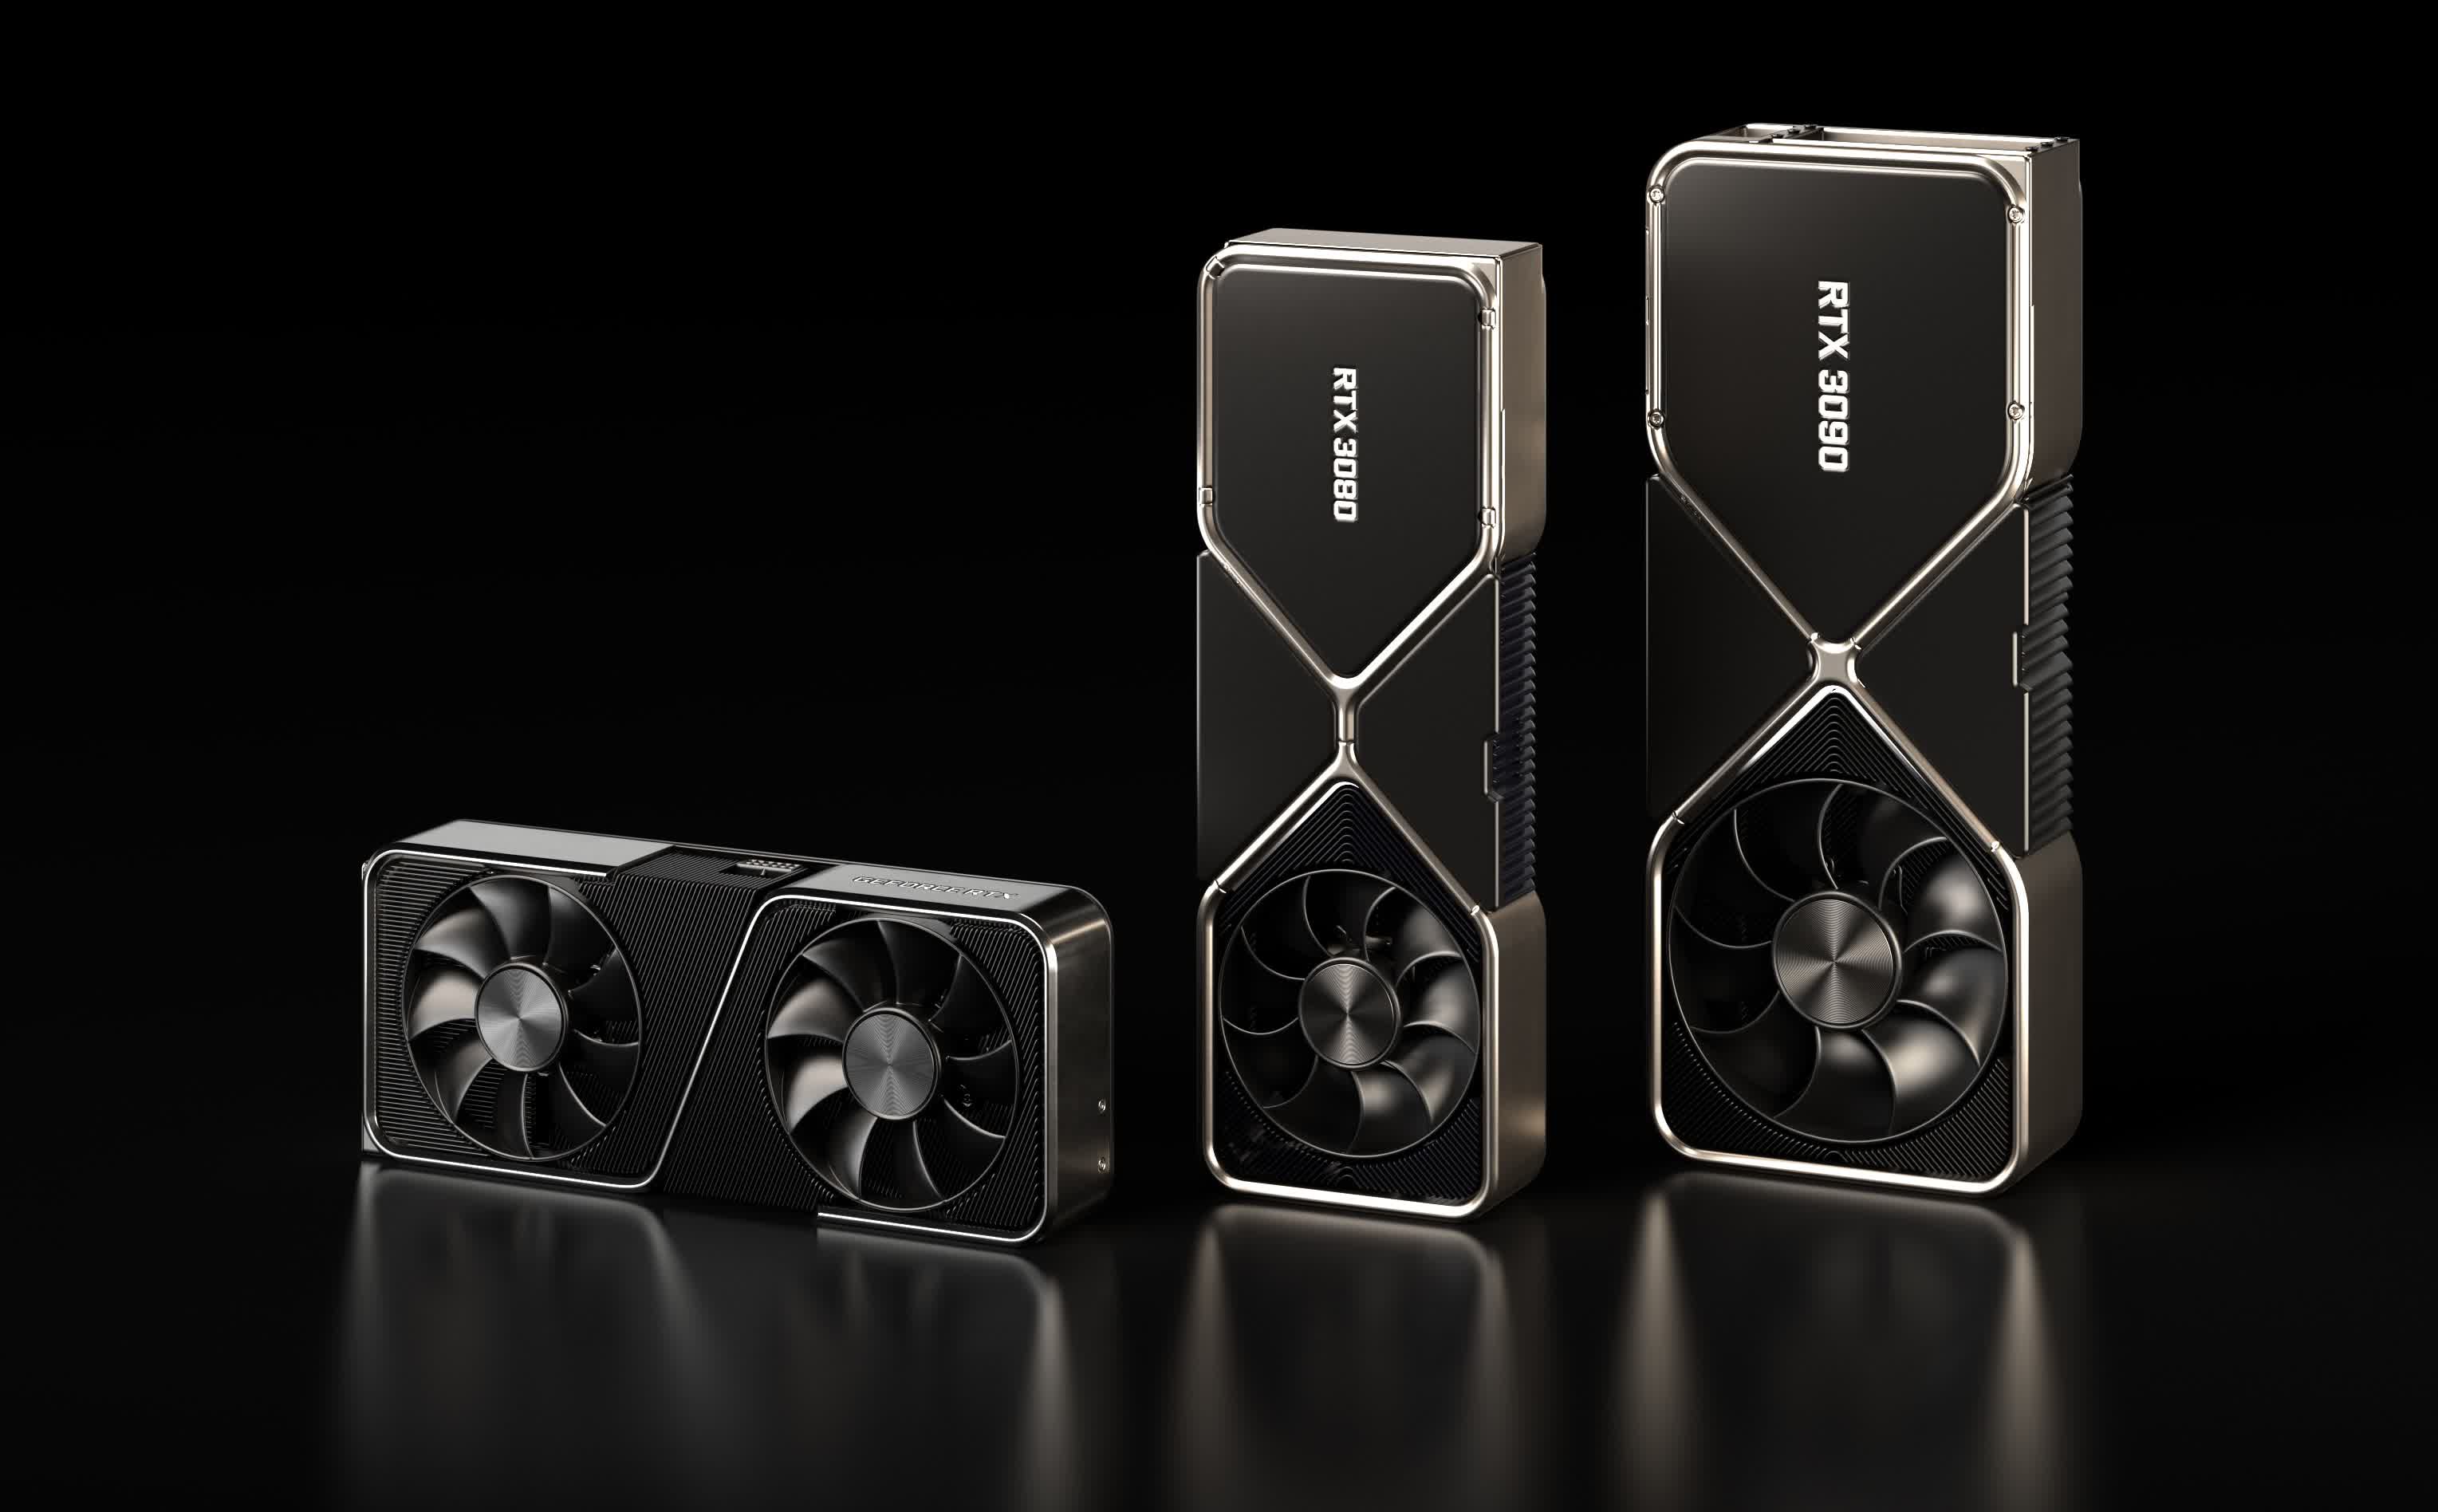 Nvidia pushes ray-traced gaming ahead with new GeForce RTX 3000 GPUs